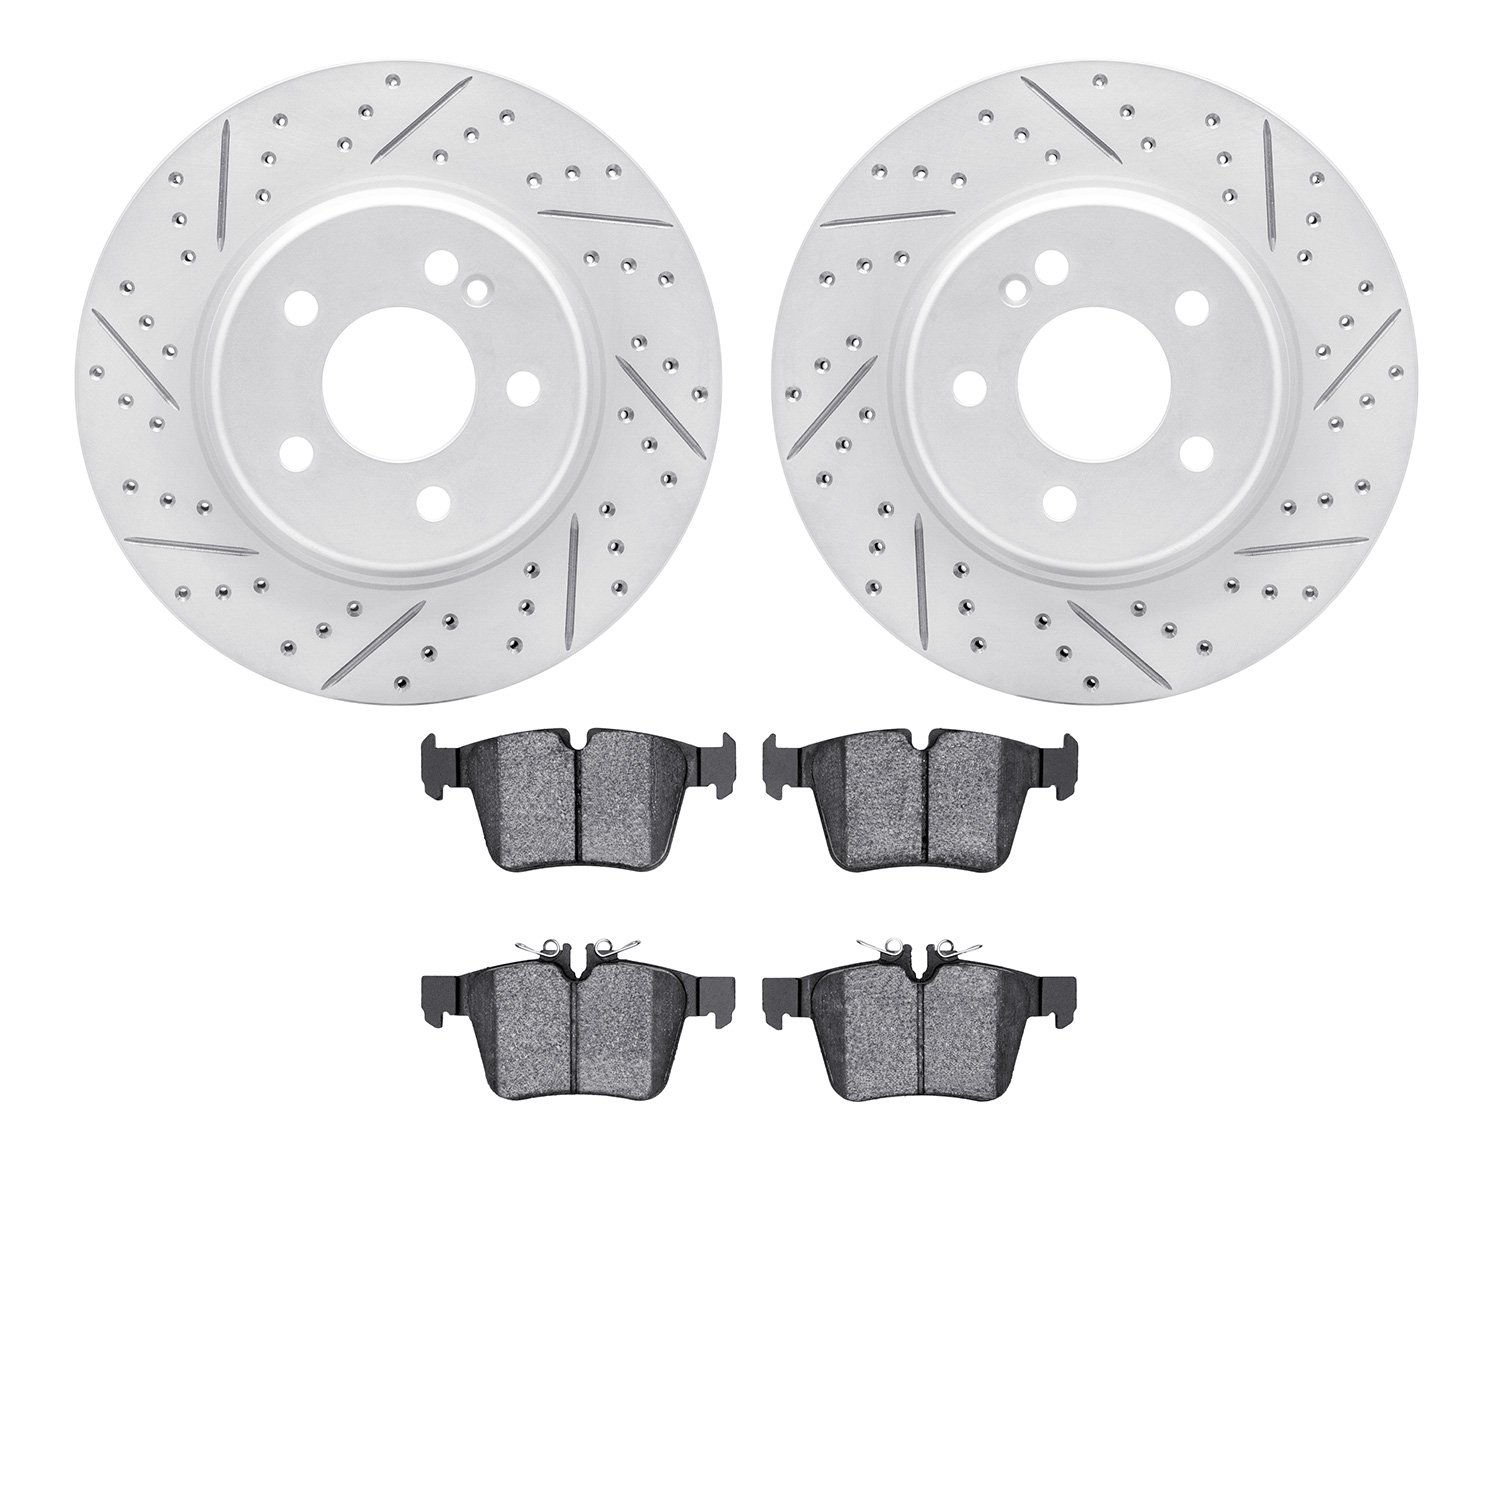 2502-63047 Geoperformance Drilled/Slotted Rotors w/5000 Advanced Brake Pads Kit, Fits Select Mercedes-Benz, Position: Rear